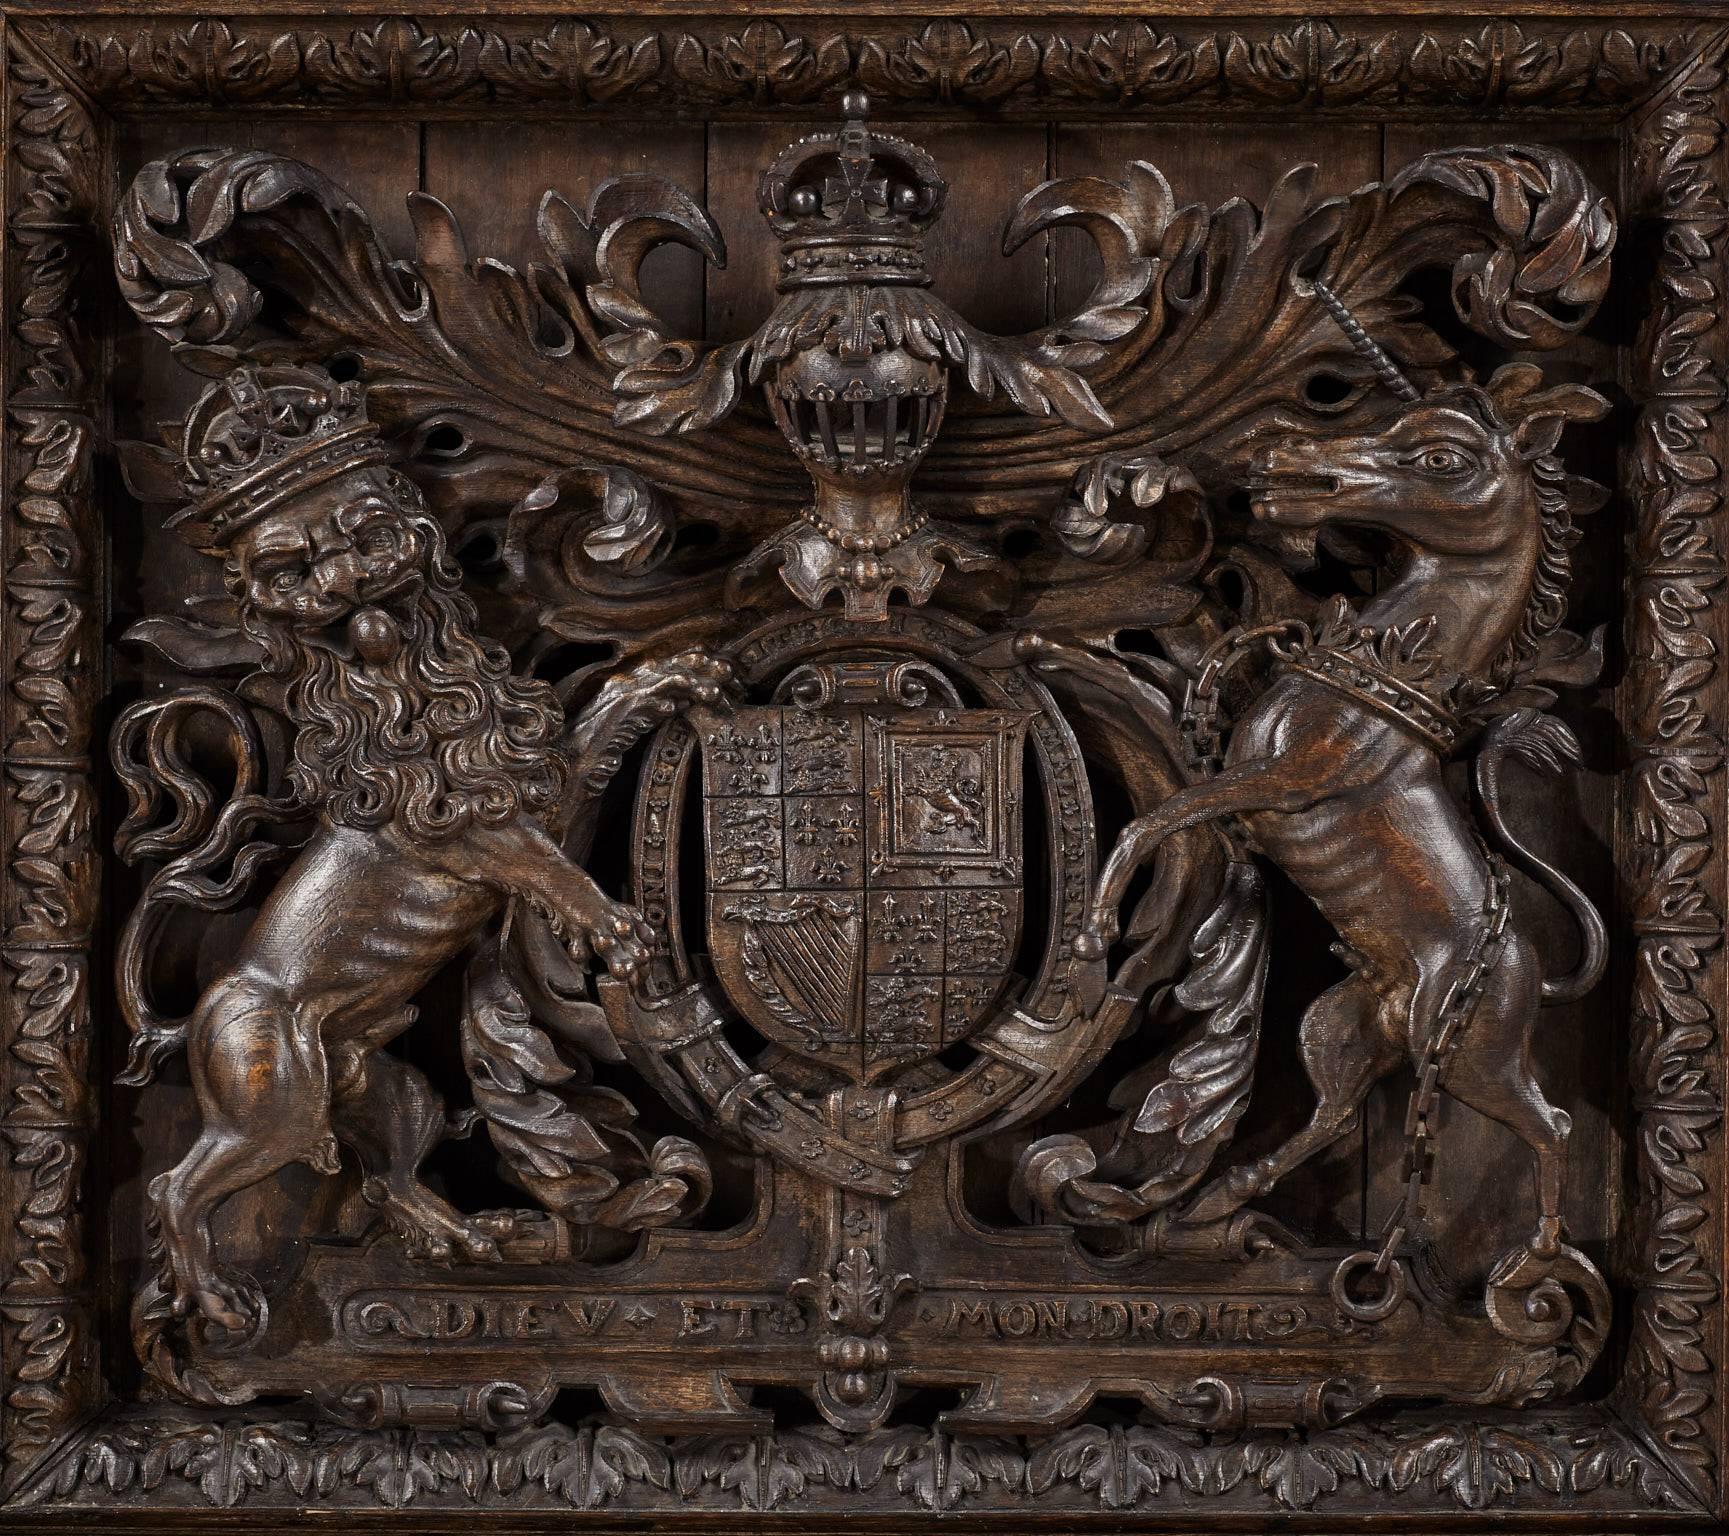 Carved oak overmantel featuring the Royal Arms of James I. 

The Royal Arms flanked by the Four Parts of the World, the figural designs taken from Philips Galle's 'Prosoprographia', with America depicted as a Carab Indian female warrior, Europa